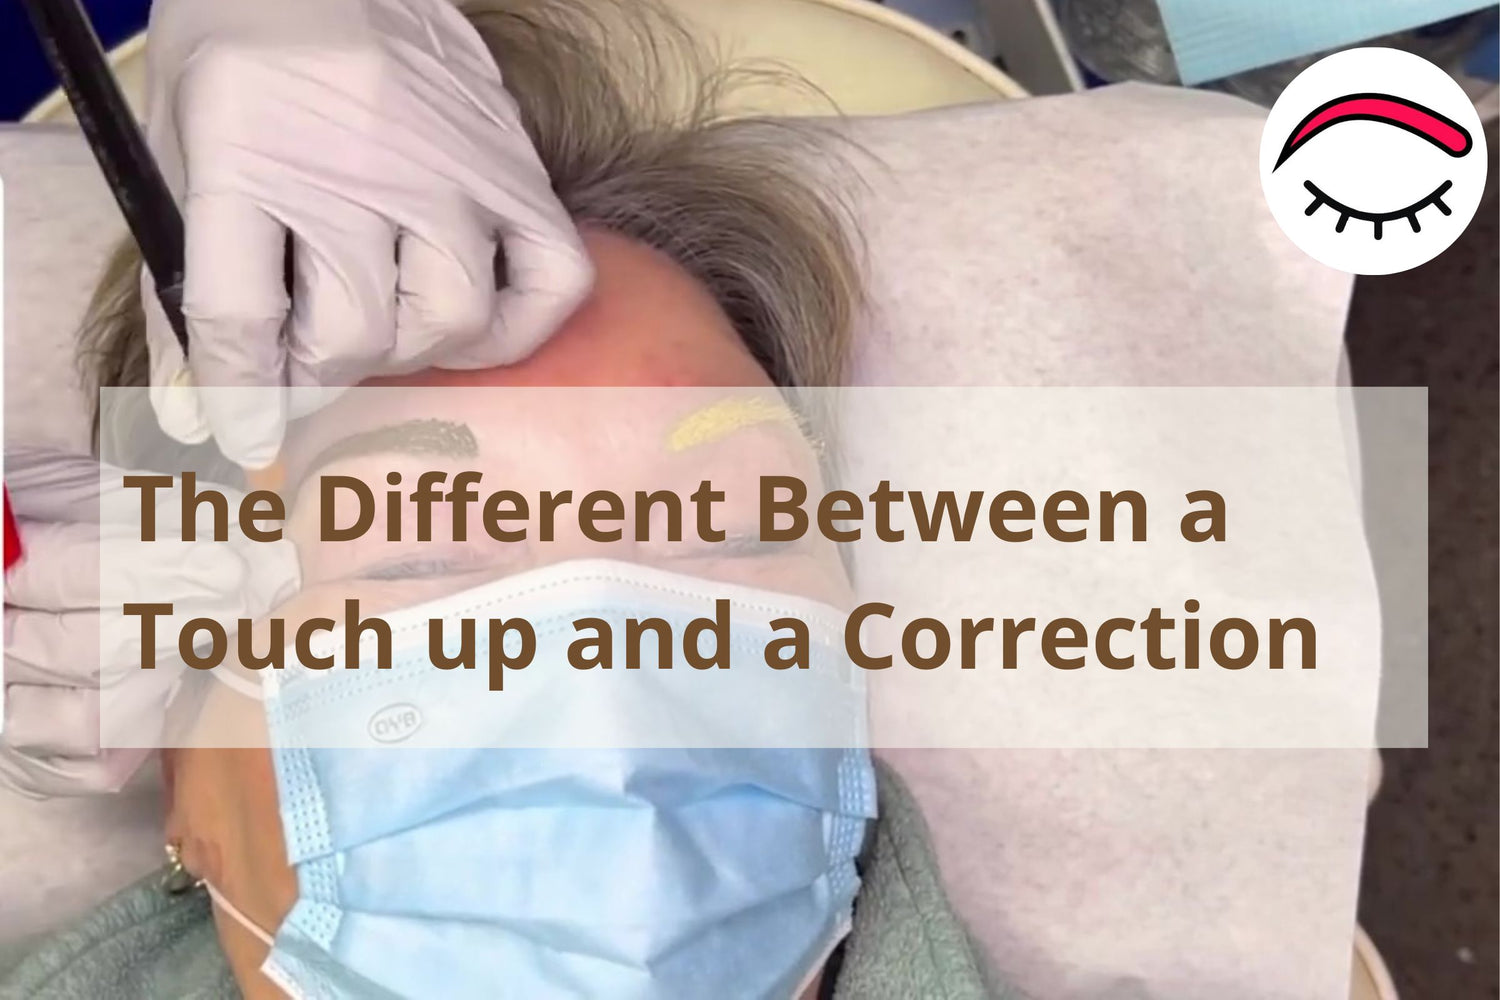  The difference between a touch-up and a correction